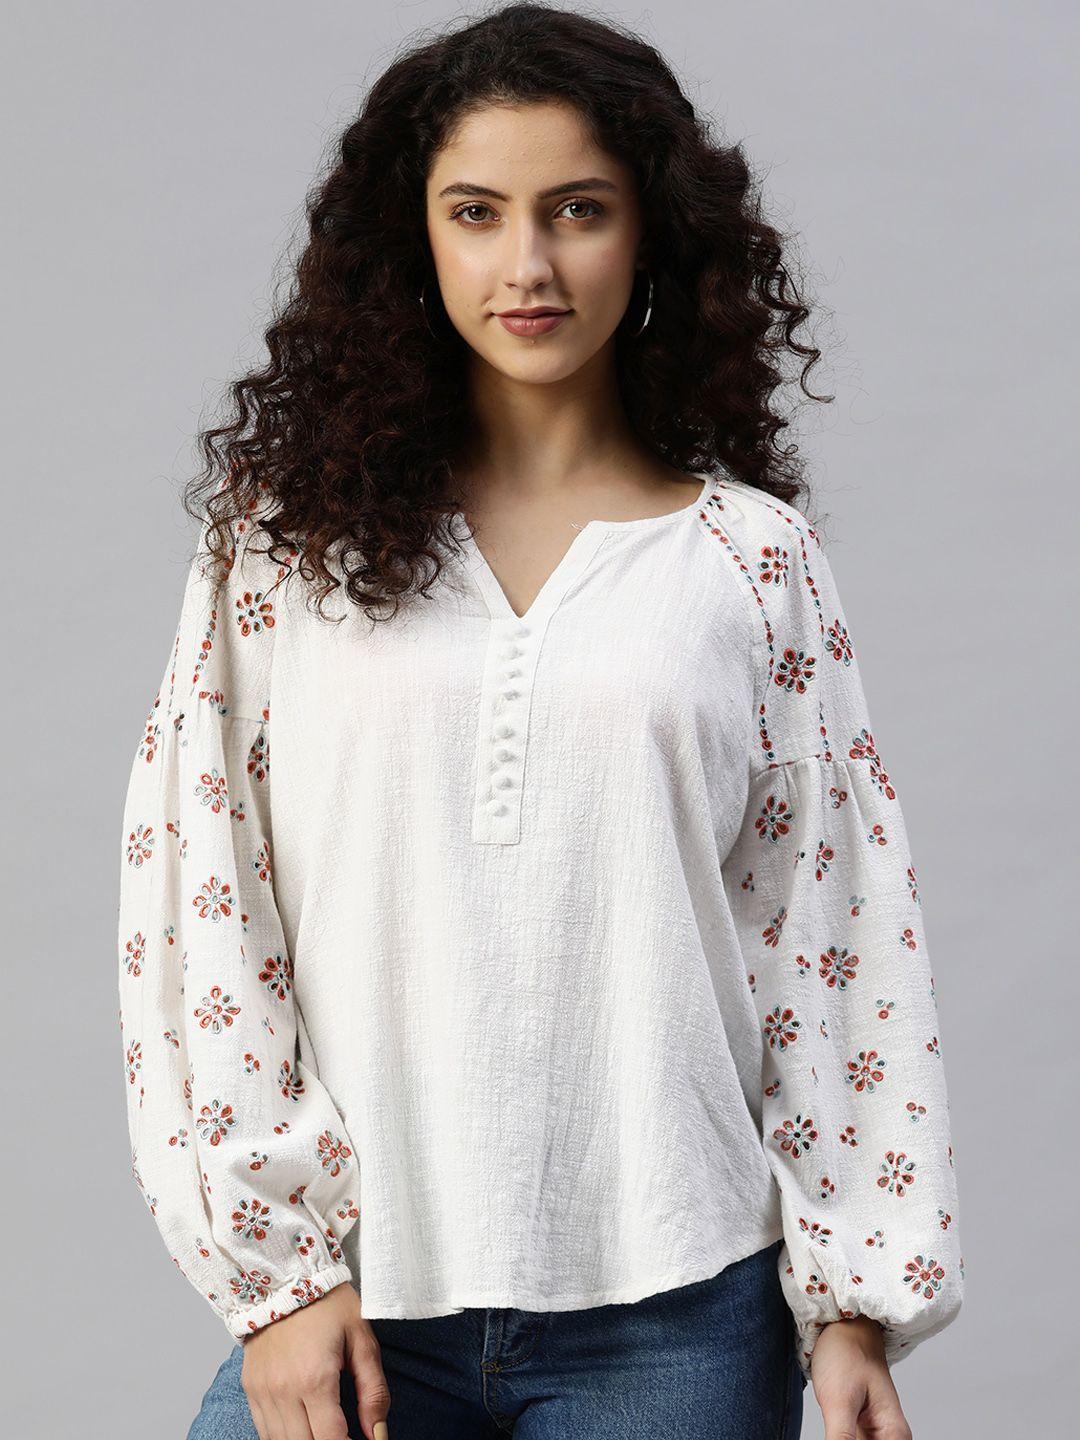 marks & spencer white & red floral embroidered top